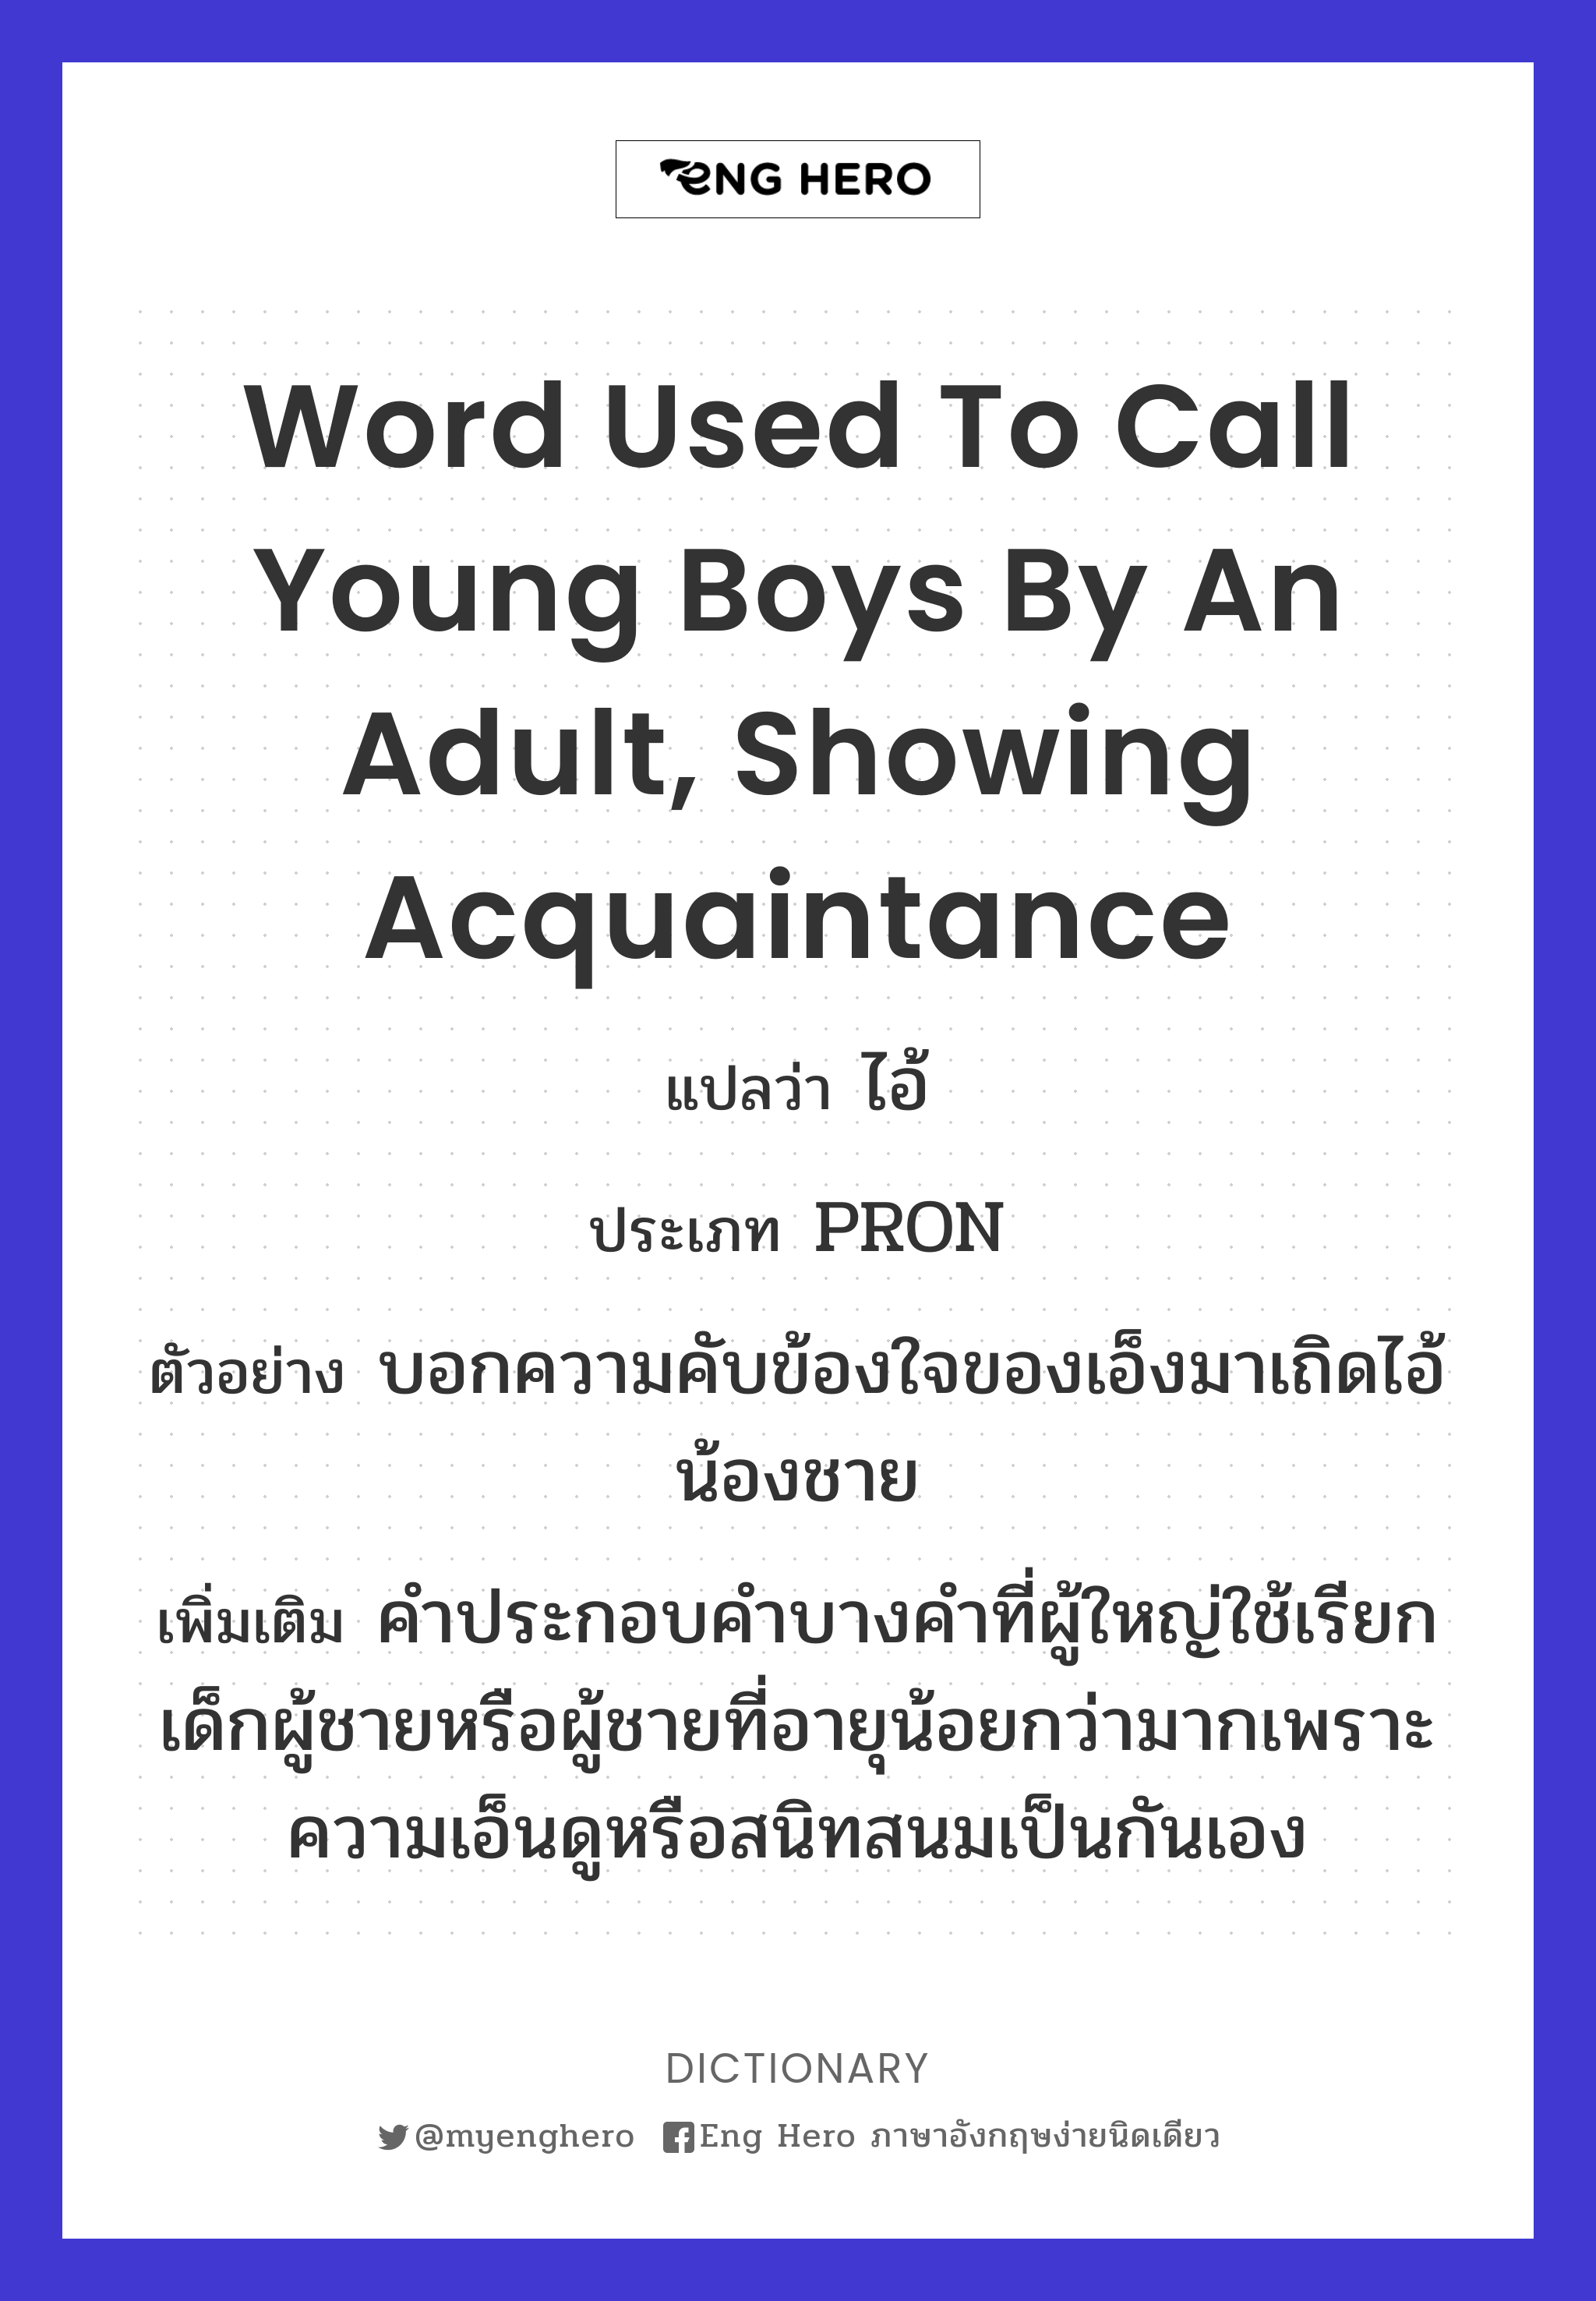 word used to call young boys by an adult, showing acquaintance